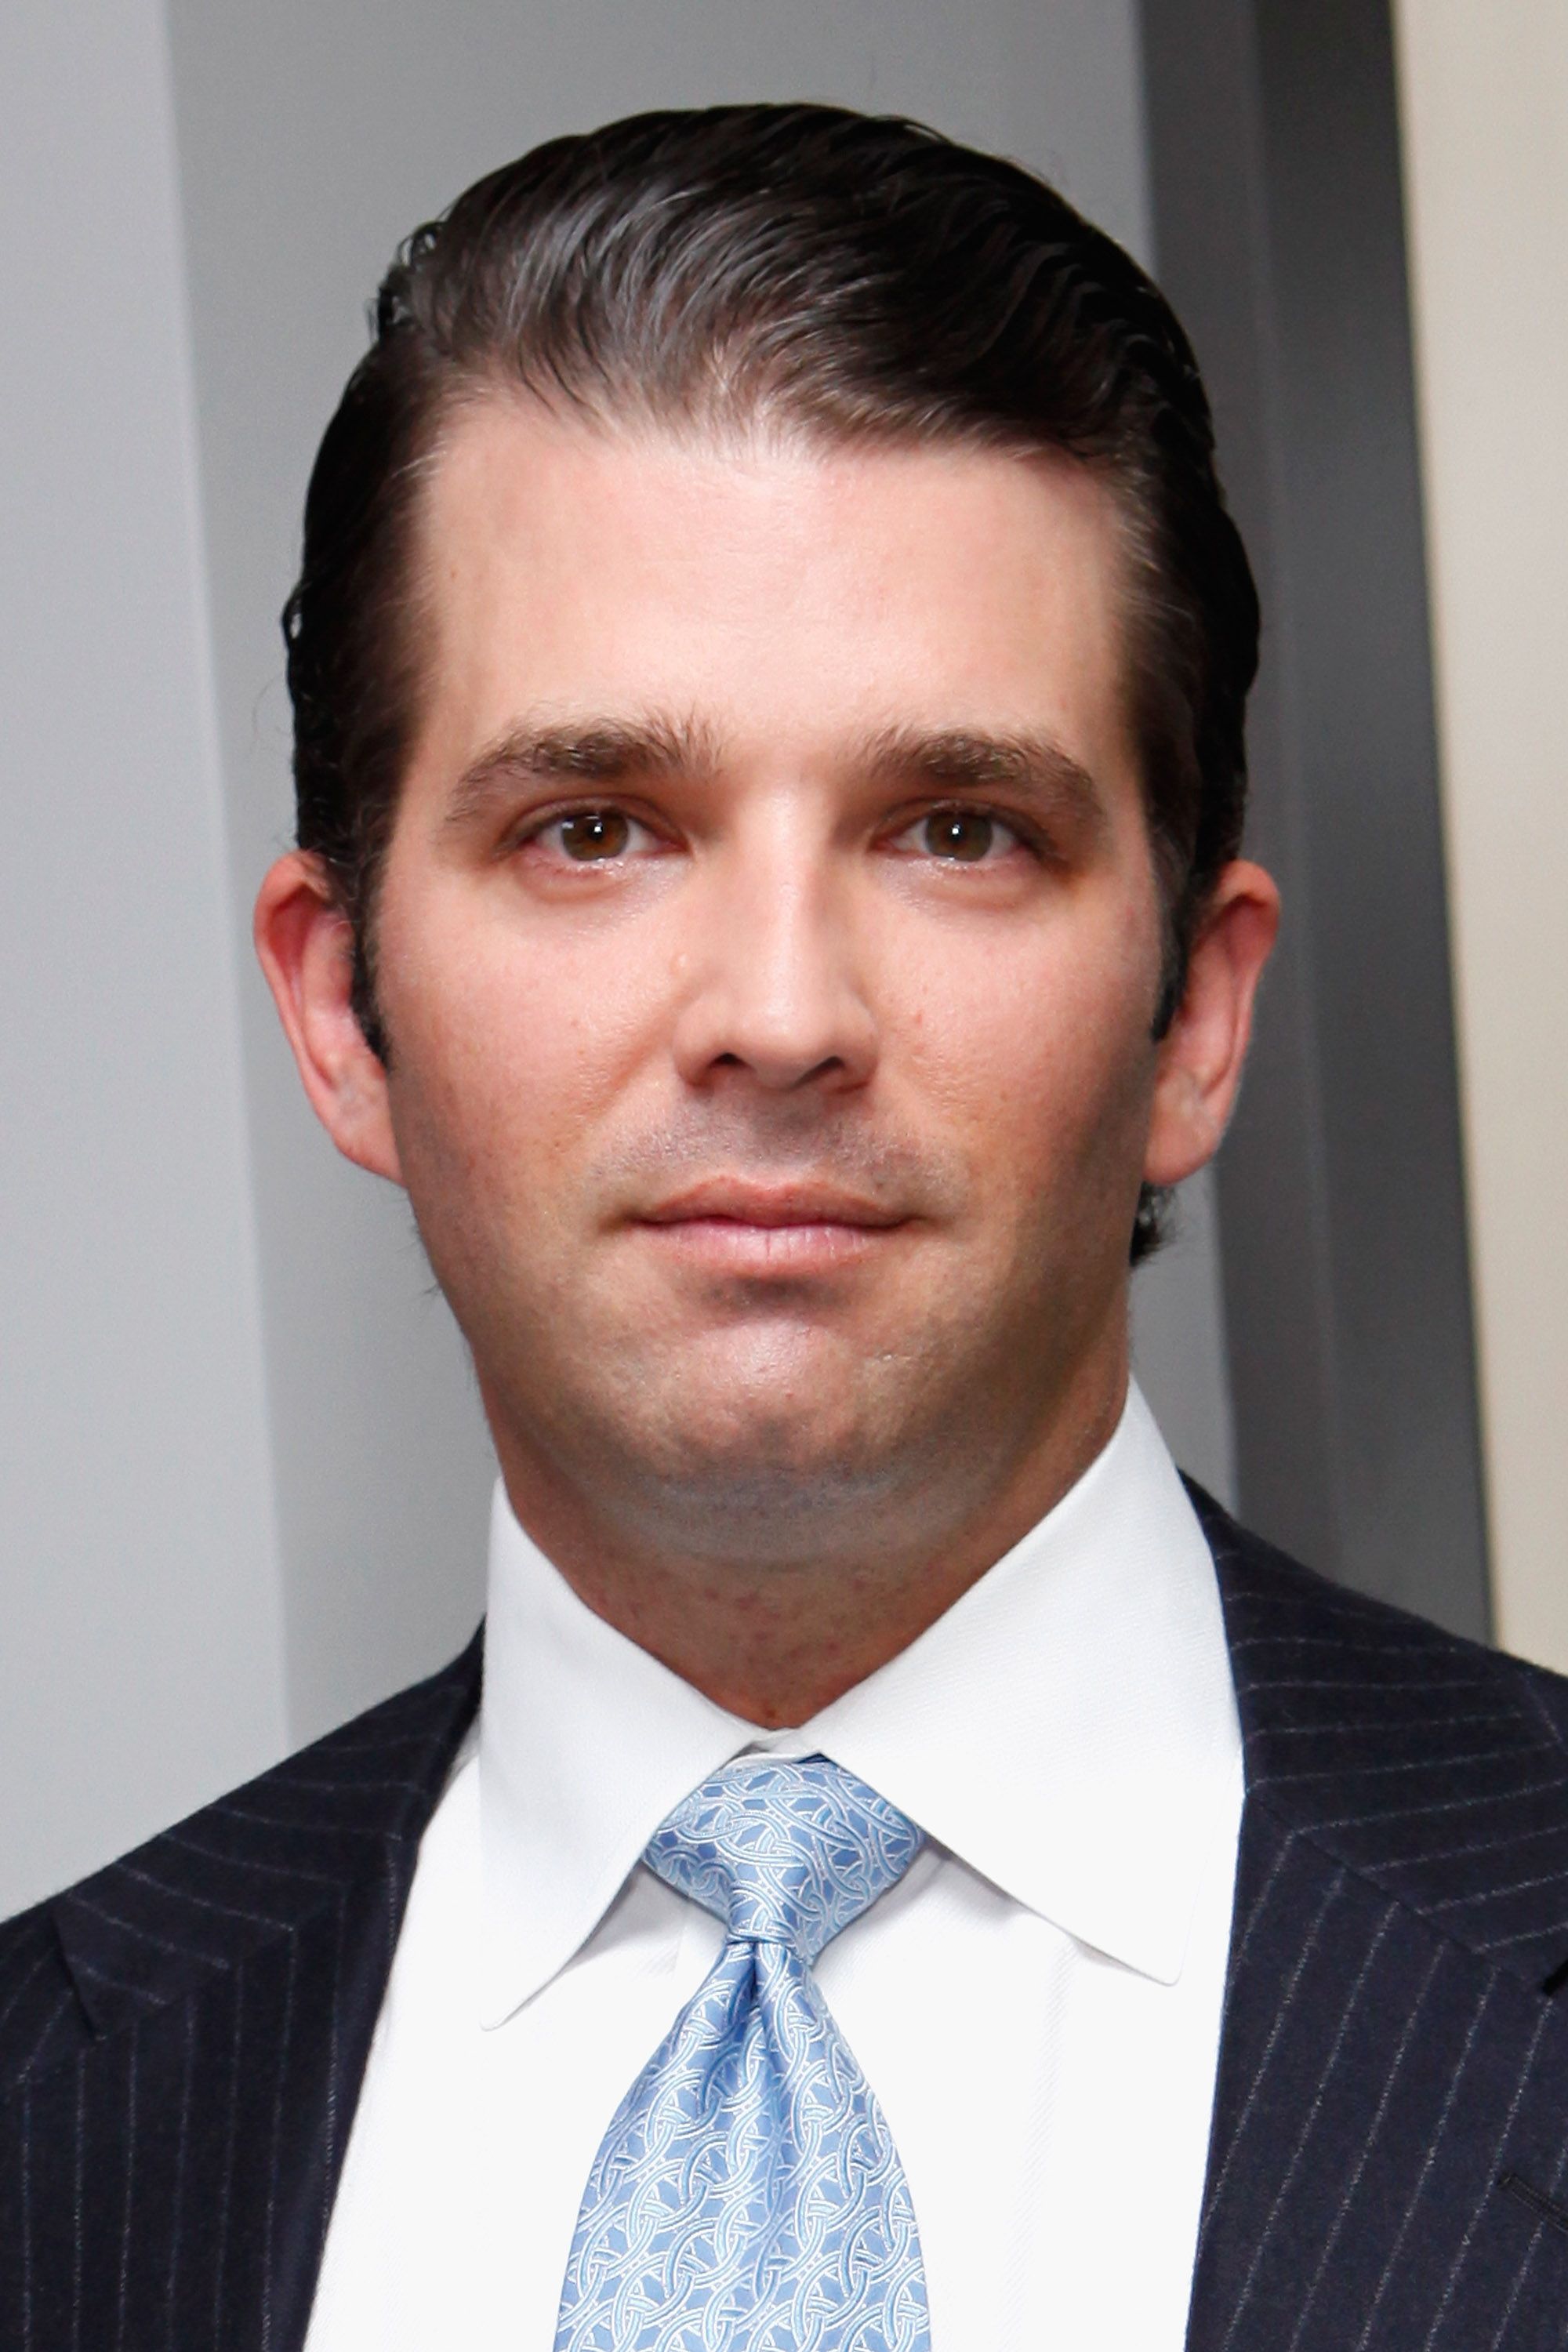 Donald Trump, Jr. poses at Trump Tower on May 3, 2012, in New York City | Photo: Cindy Ord/Getty Images